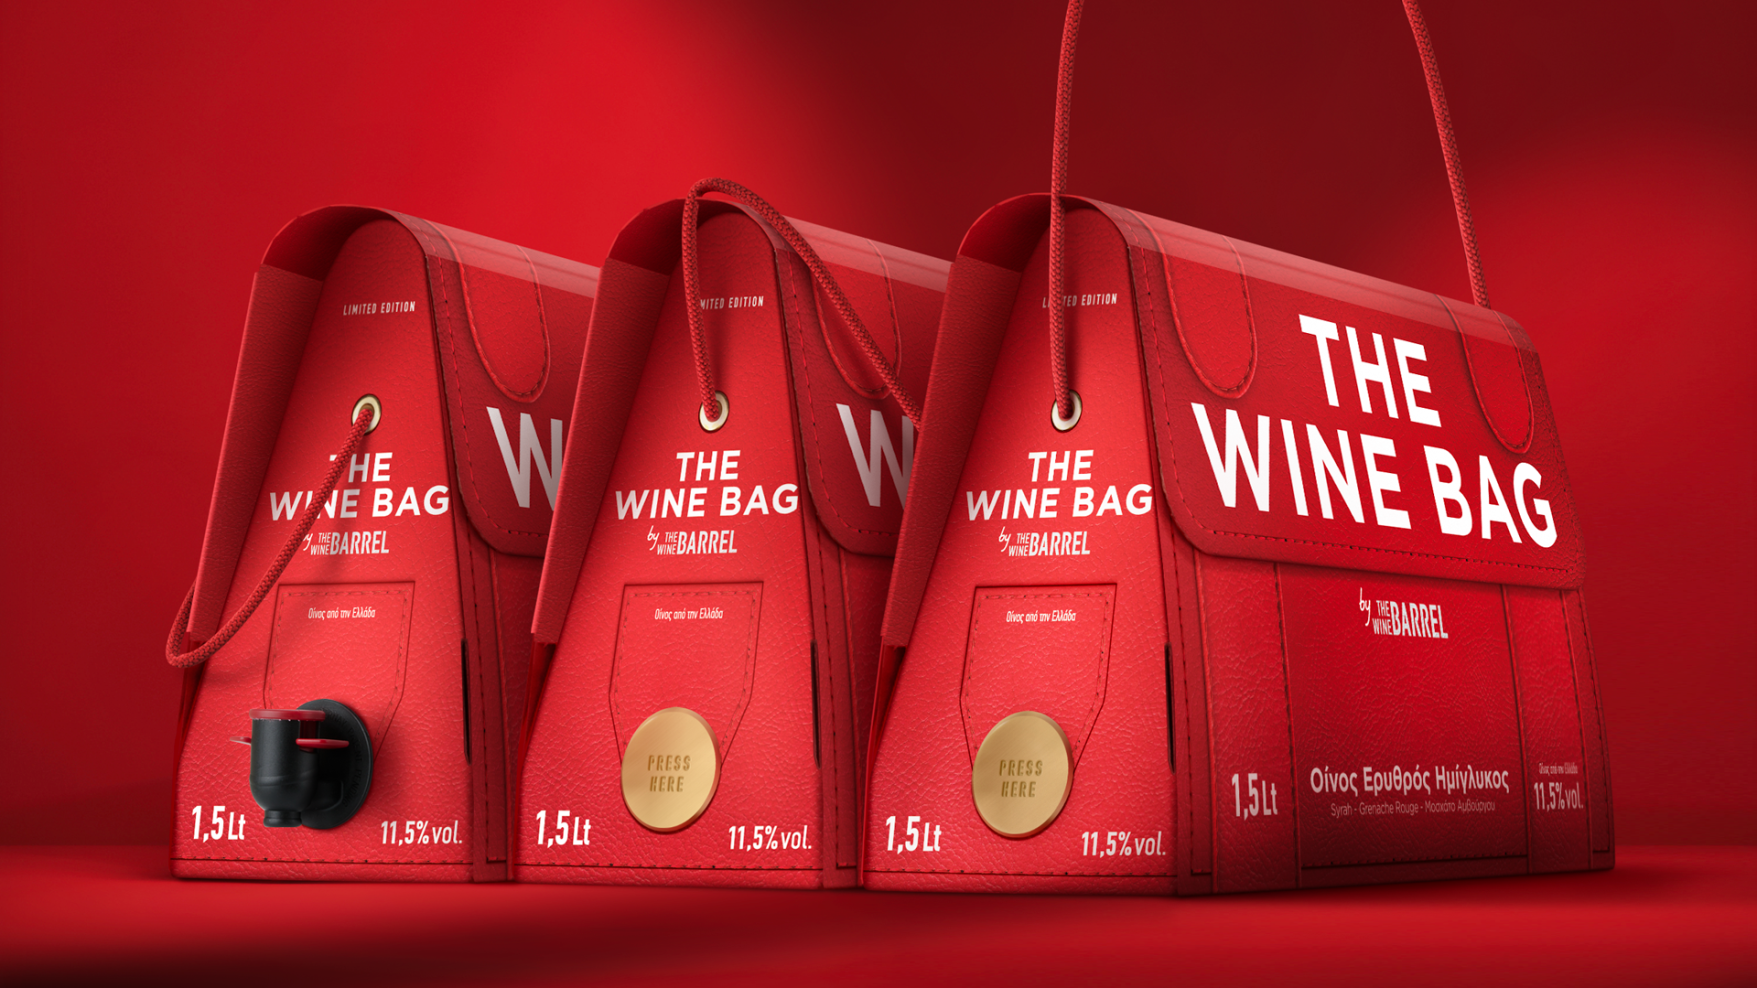  work-the-wine-bag-a